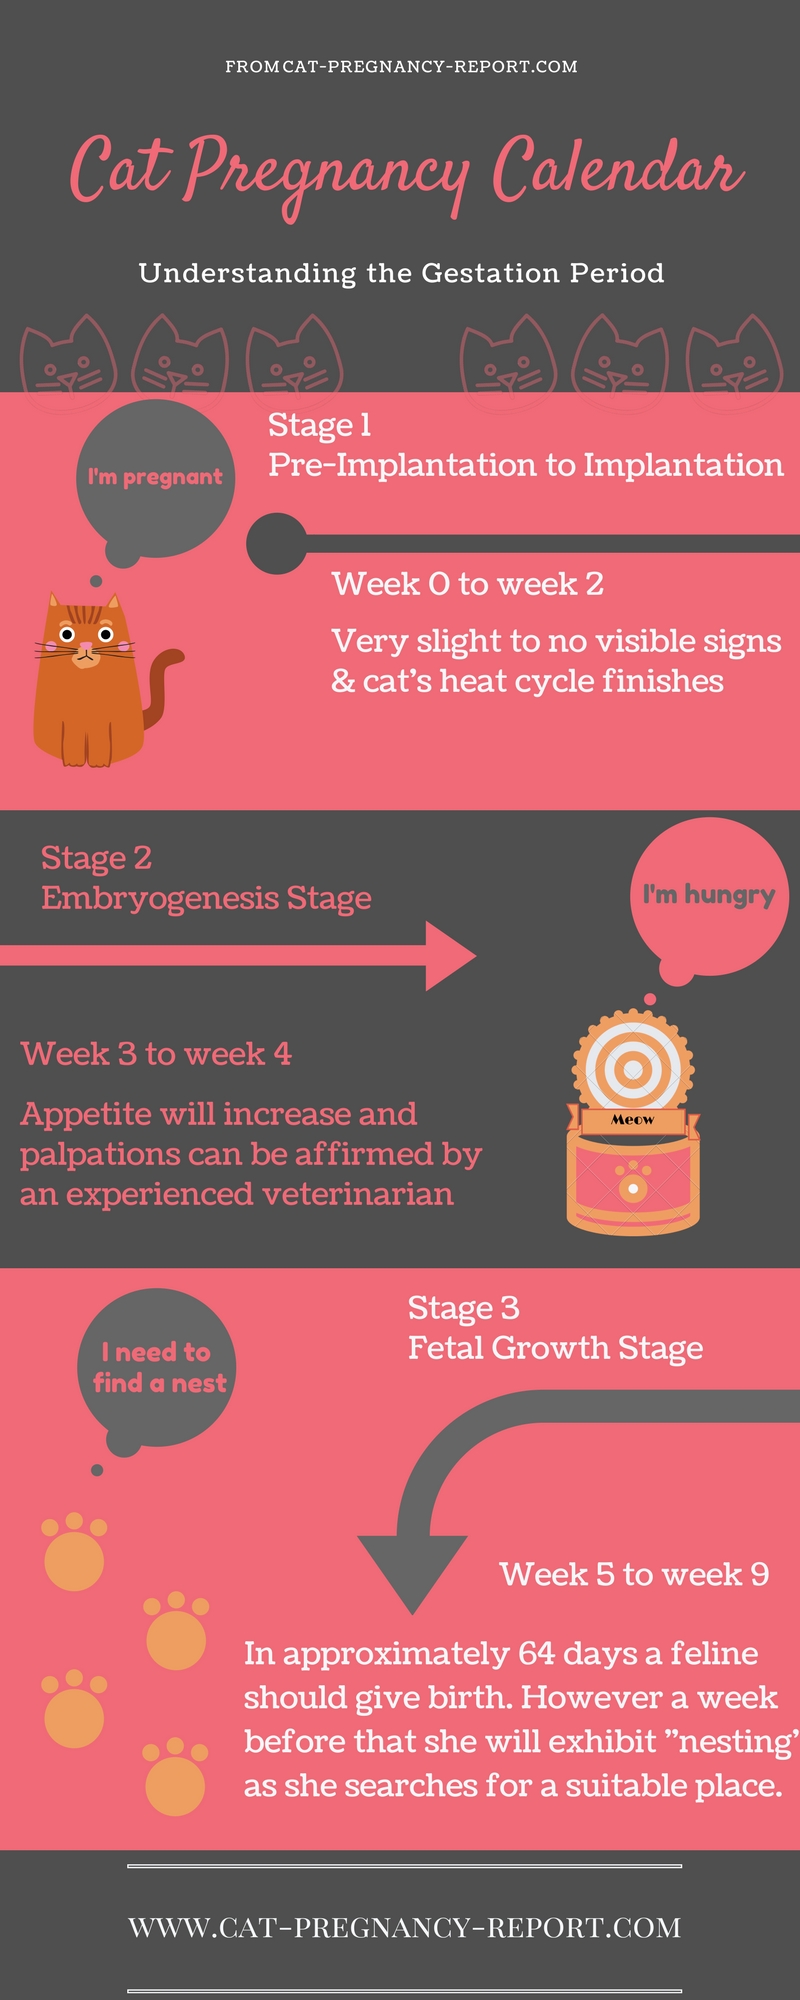 Cat Pregnancy Calendar - A Stage-By-Stage Description - Cat for Pregnancy Timeline Week By Week